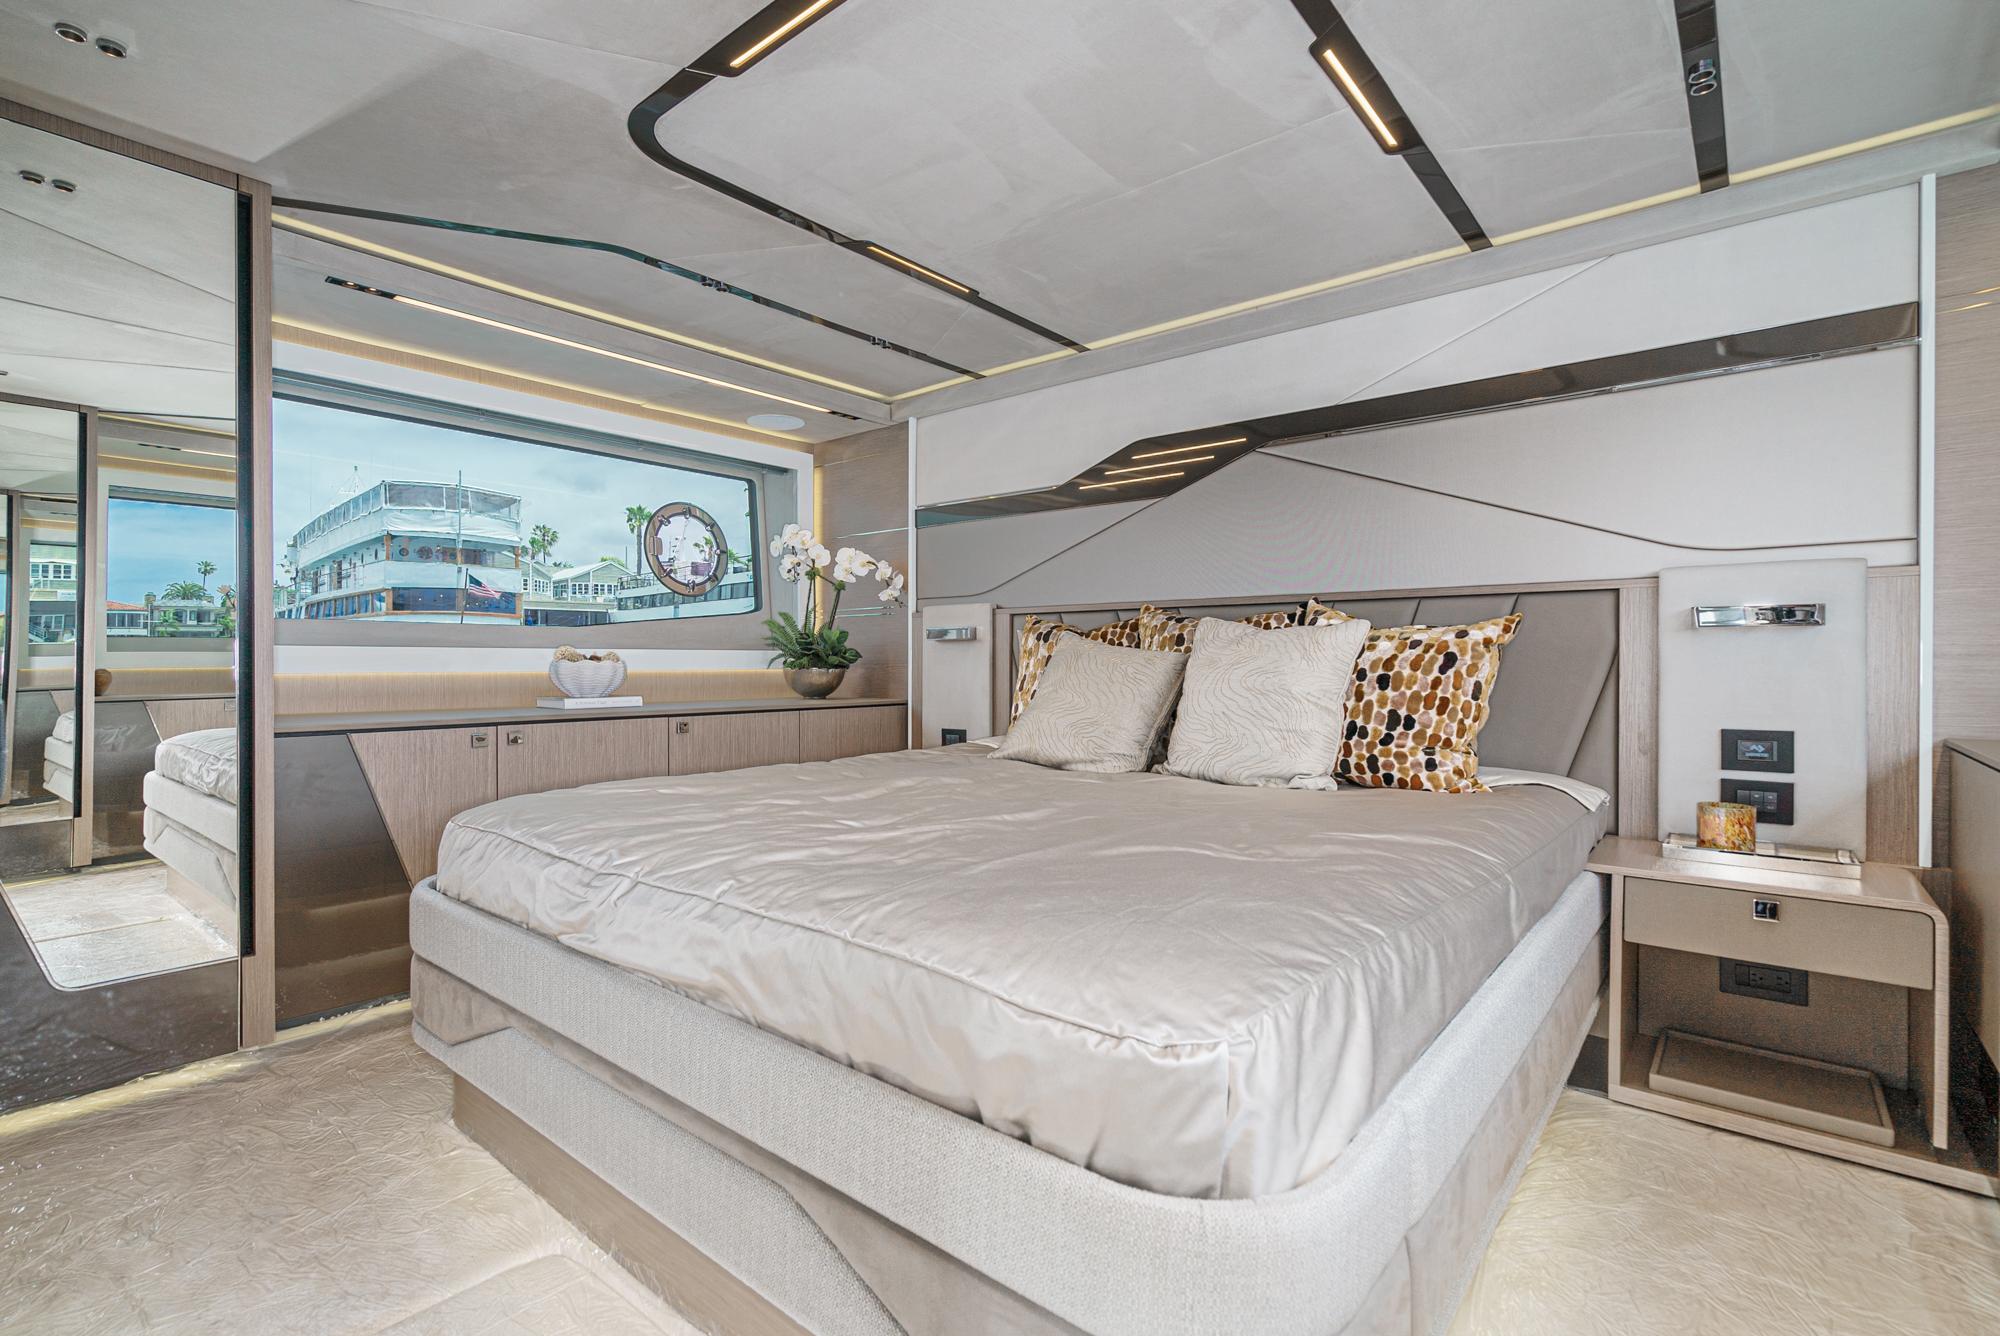 bedgoals have been met on this Beneteau GT46! This room looks so sleek,  cool, chic and contemporary. We loved this project! . . . #ya…